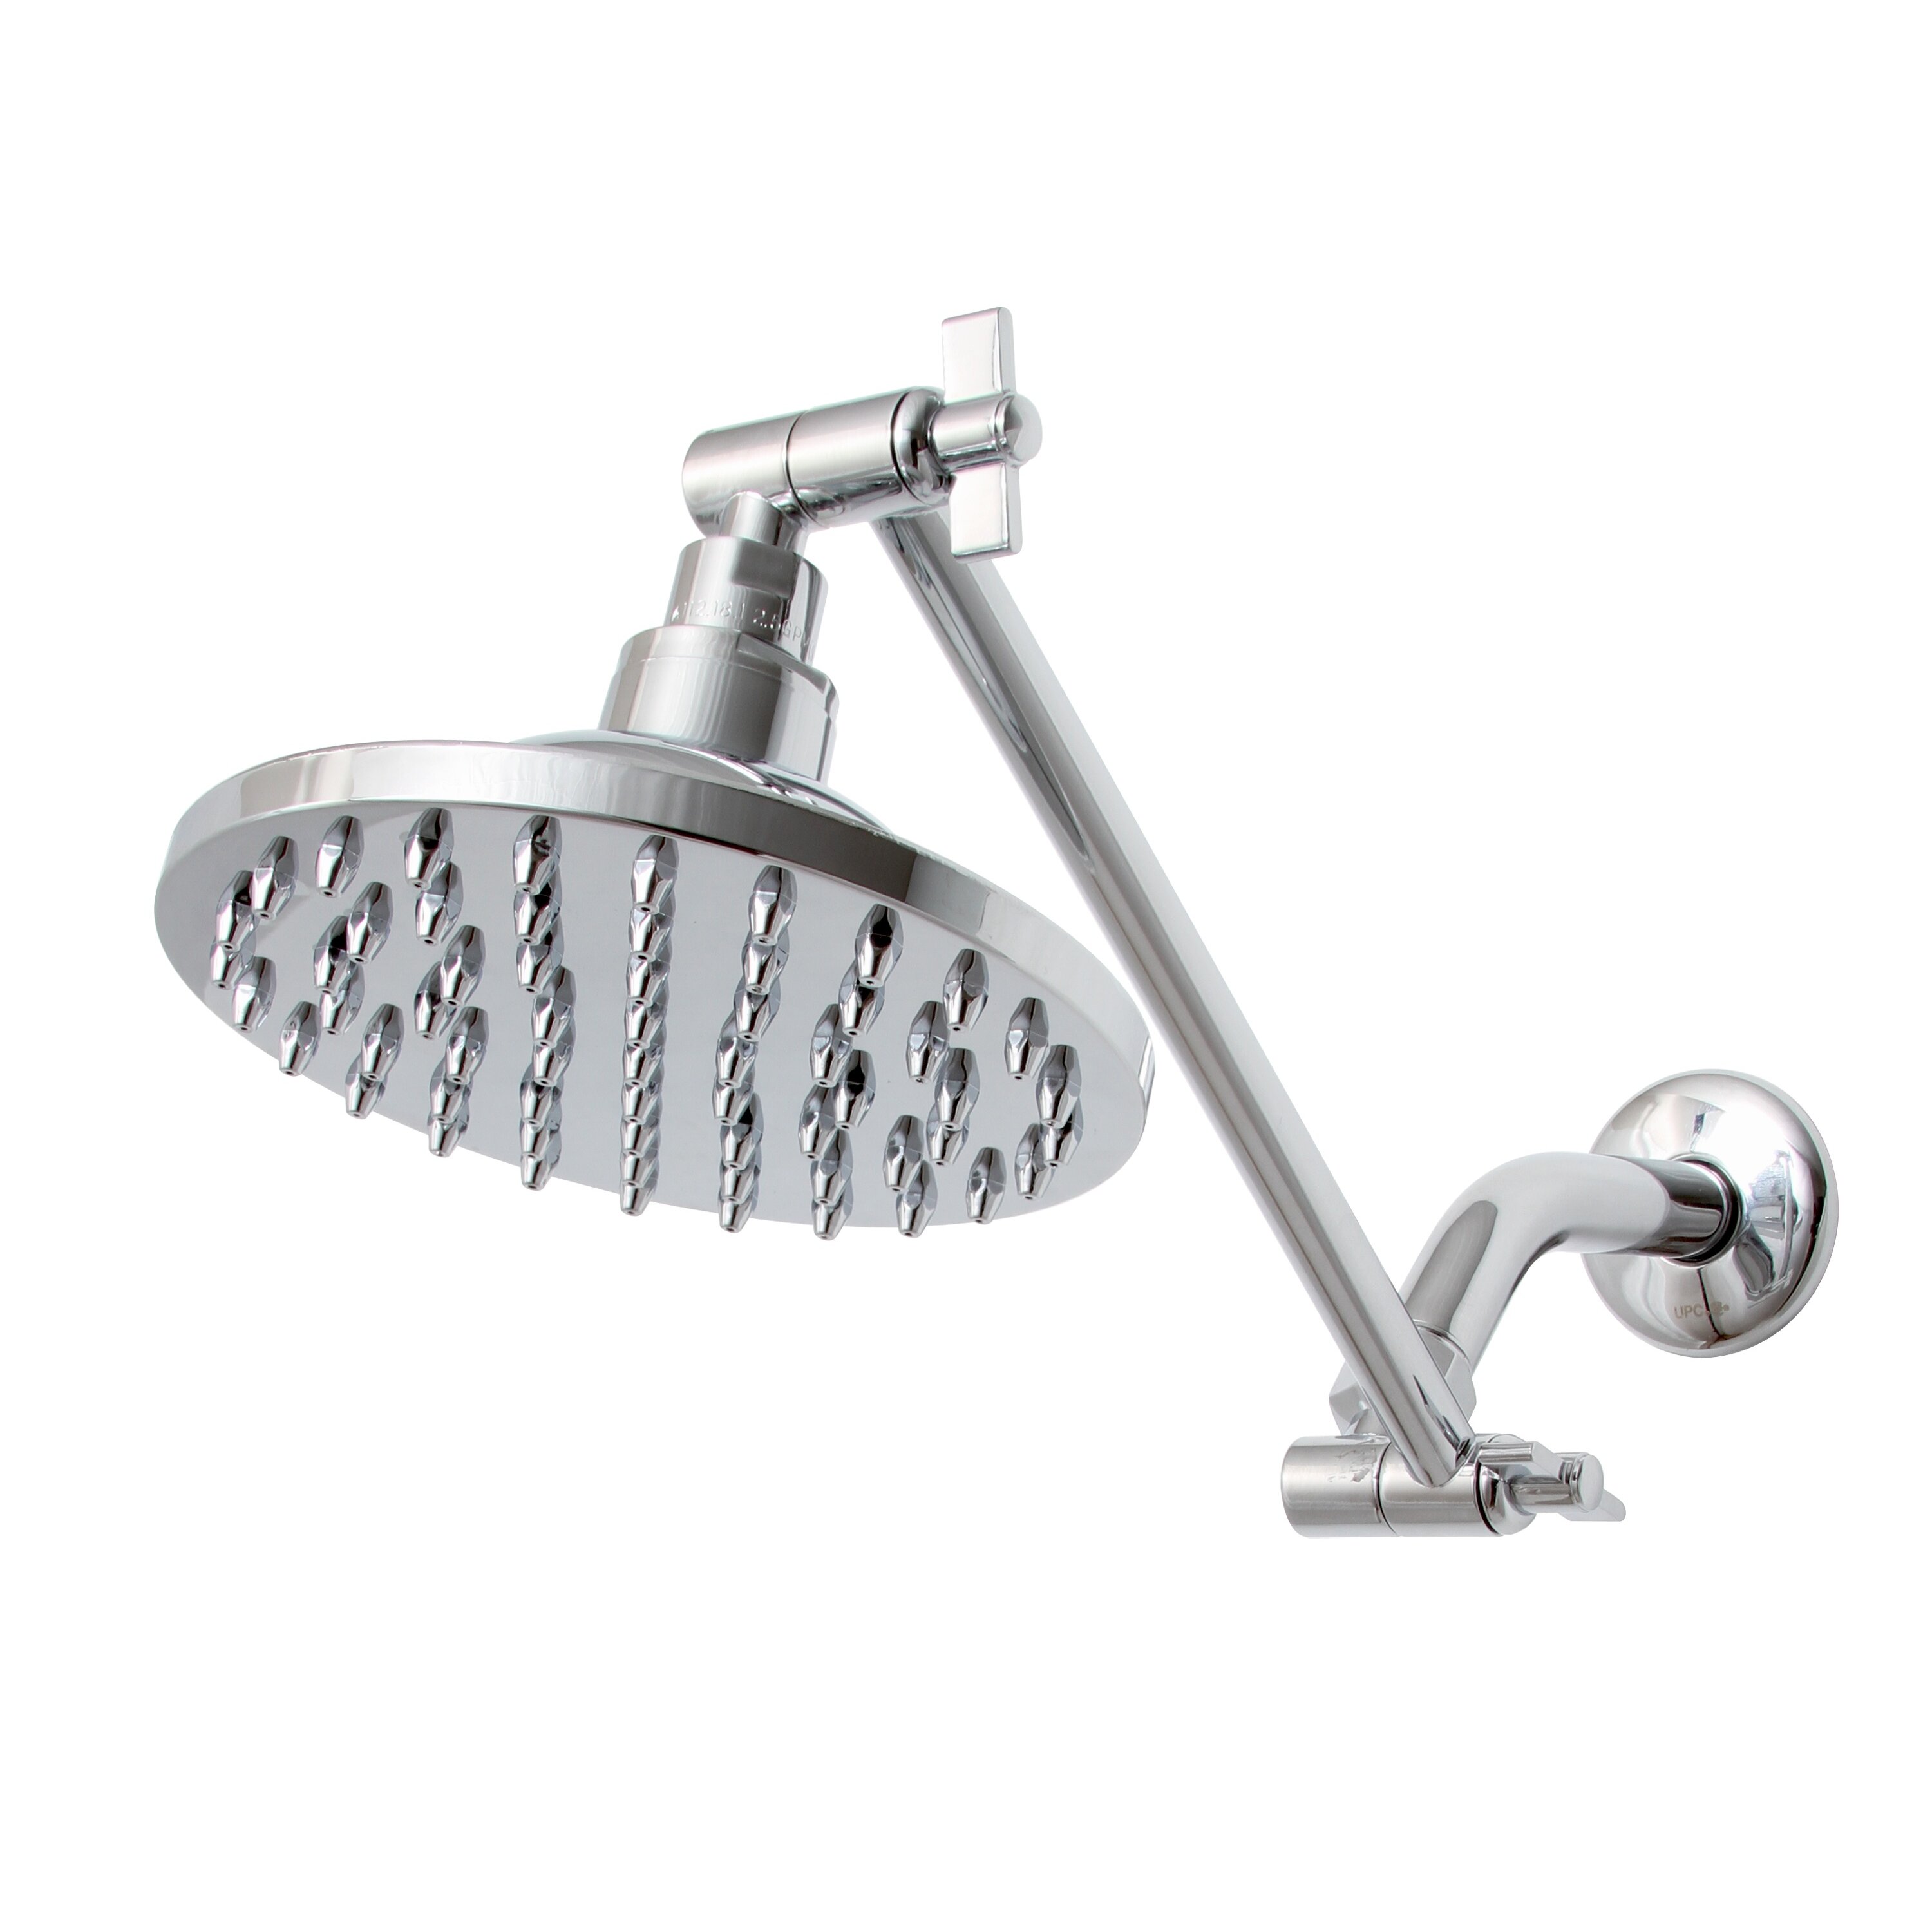 Premier Faucet  Sunflower Shower Head  with 60 Spray Jets 